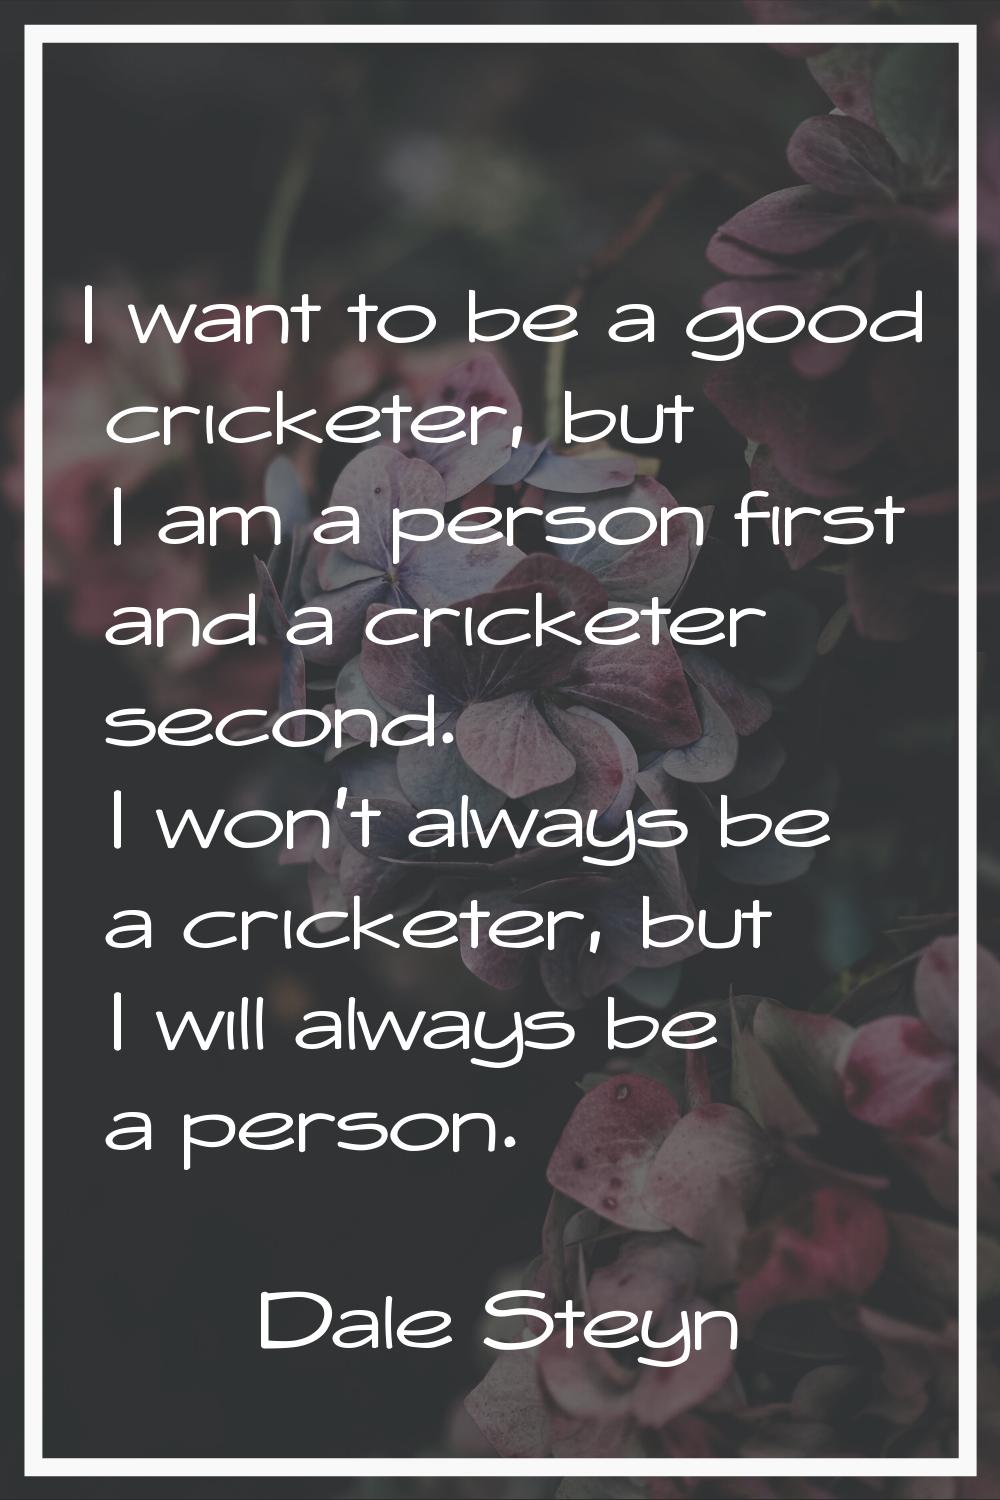 I want to be a good cricketer, but I am a person first and a cricketer second. I won't always be a 